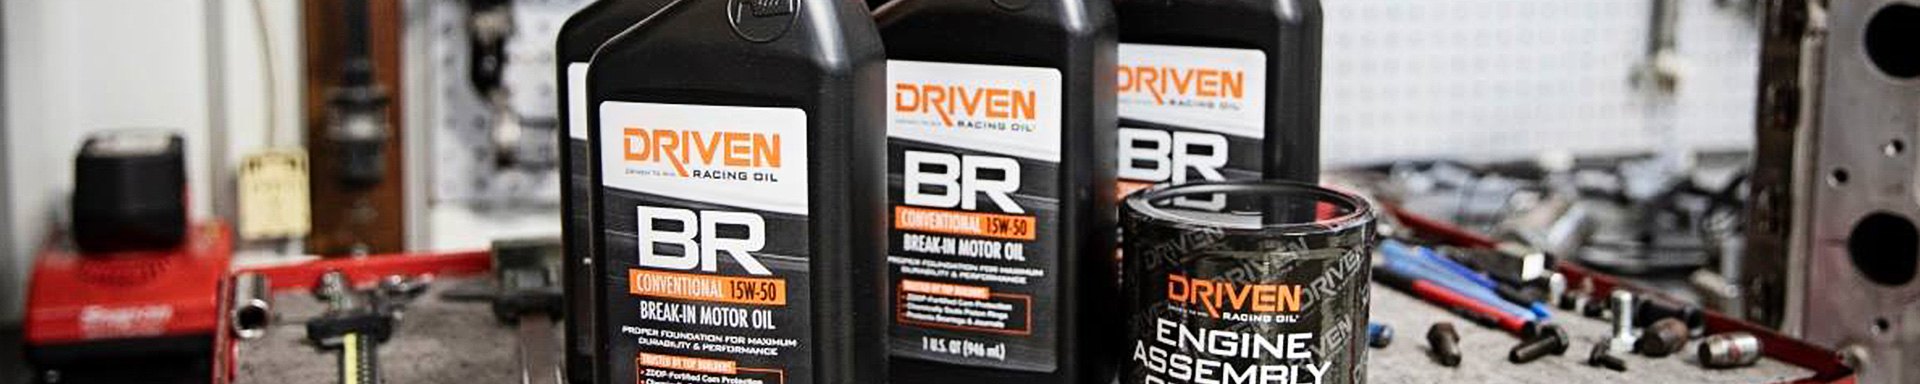 Driven Racing Oil Fuel System Service